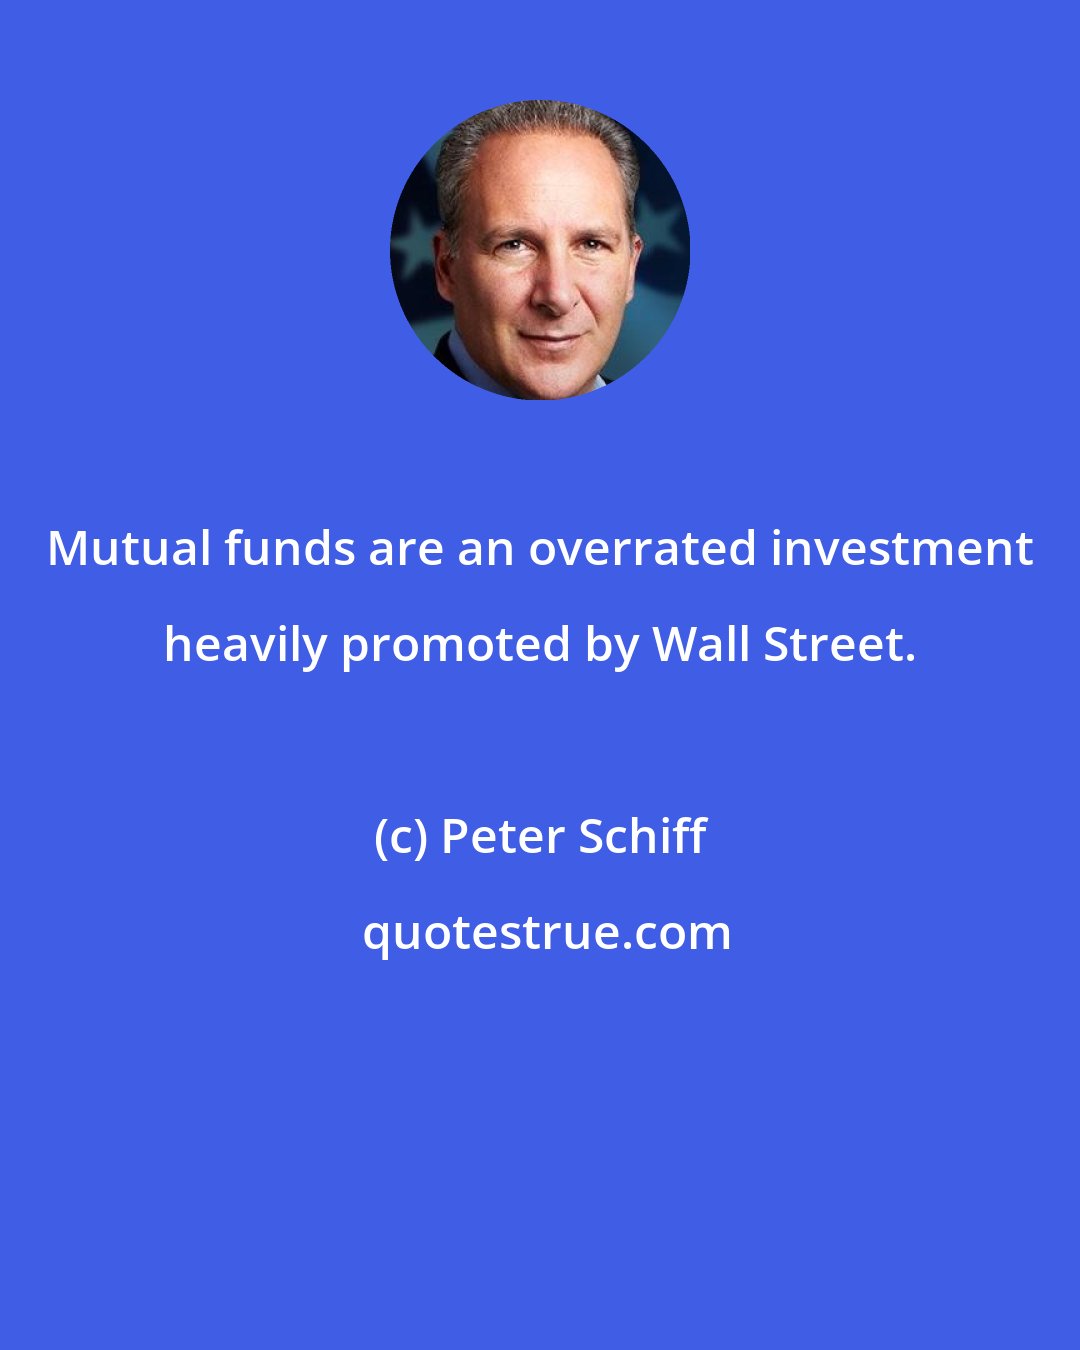 Peter Schiff: Mutual funds are an overrated investment heavily promoted by Wall Street.